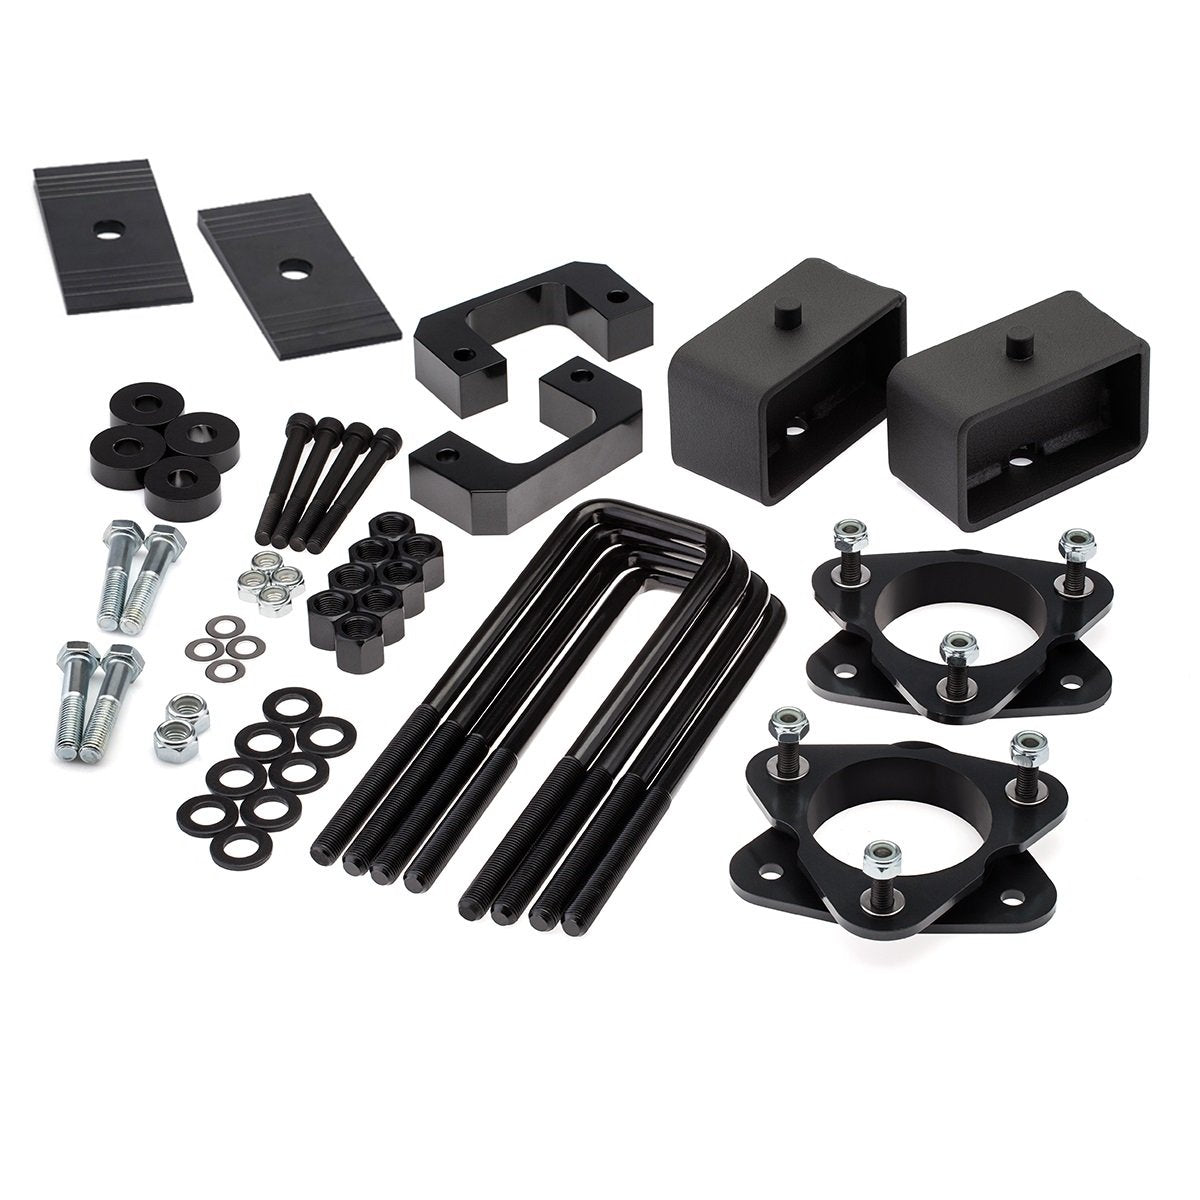 2007-2021 GMC Sierra 1500 Full Lift Kit with Shims and Differential Drop Kit